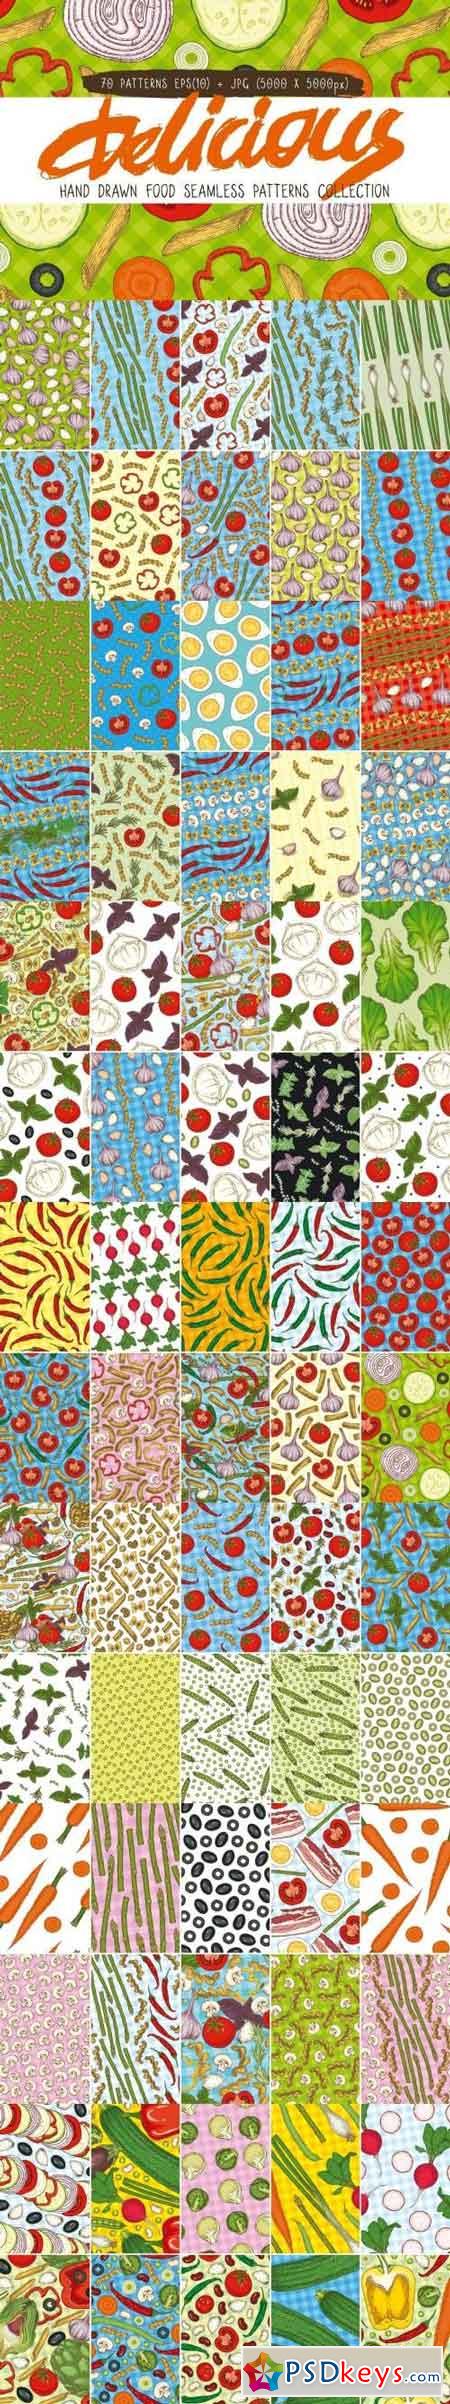 Food Seamless Patterns Collection